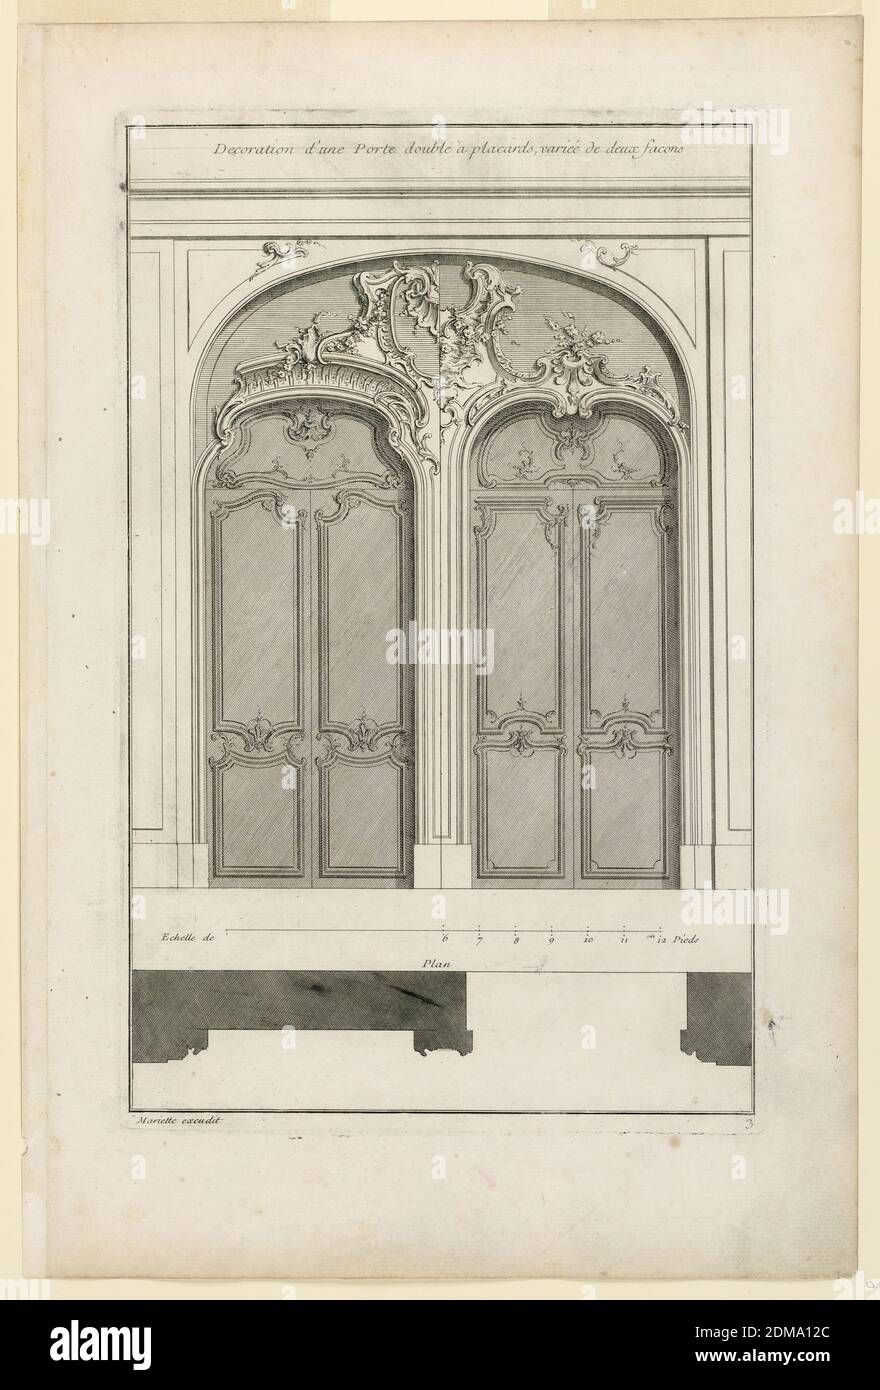 Plate 3, 'Decoration d'une Porte double à placards...', Jacques-François Blondel, French, 1705 - 1774, Jean Mariette, 1660–1742, Engraving on paper, Two double doors in a joint arch, both doors with different carving. Joint overdoor with alternate suggestions or rocaille volutes and flowers. Below, profiles. Inscribed along upper margin: 'Decoration d'une Porte double à placards, variée de deux facons'; lower left: 'mariette excudit'; lower right: '3'., France, ca. 1727, Print Stock Photo